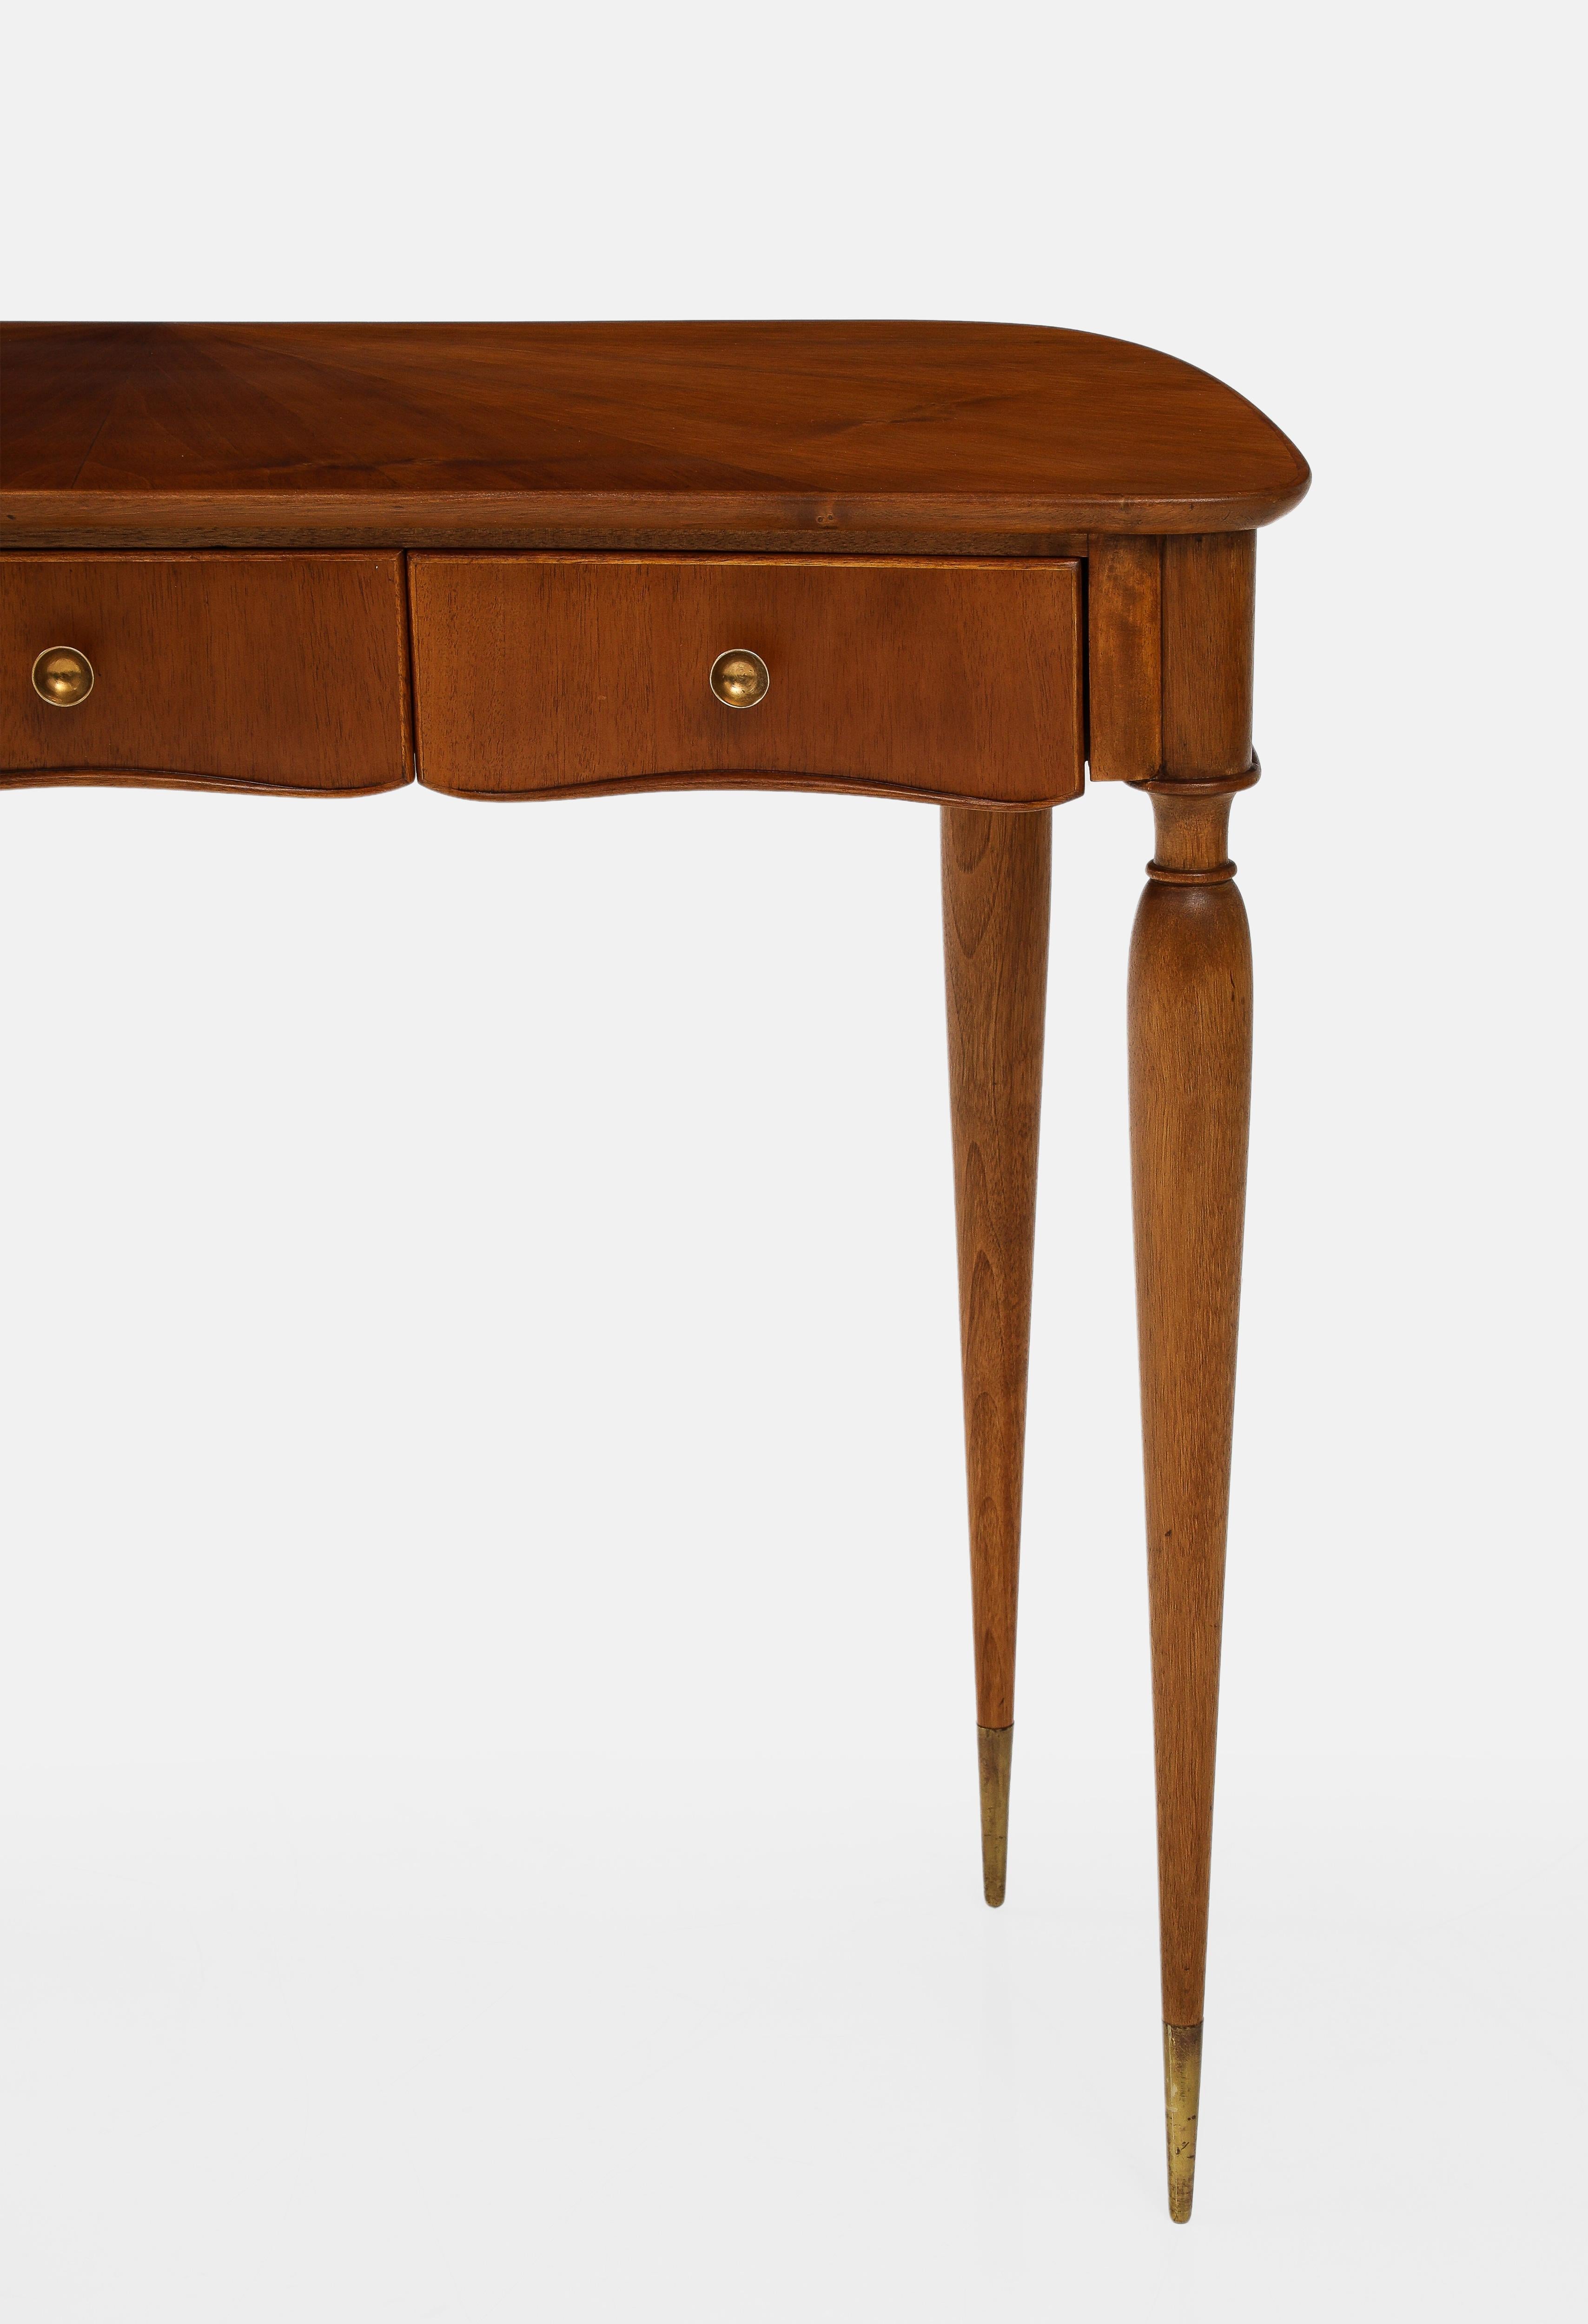 1950s Italian Walnut Wood Console or Vanity Dressing Table For Sale 4